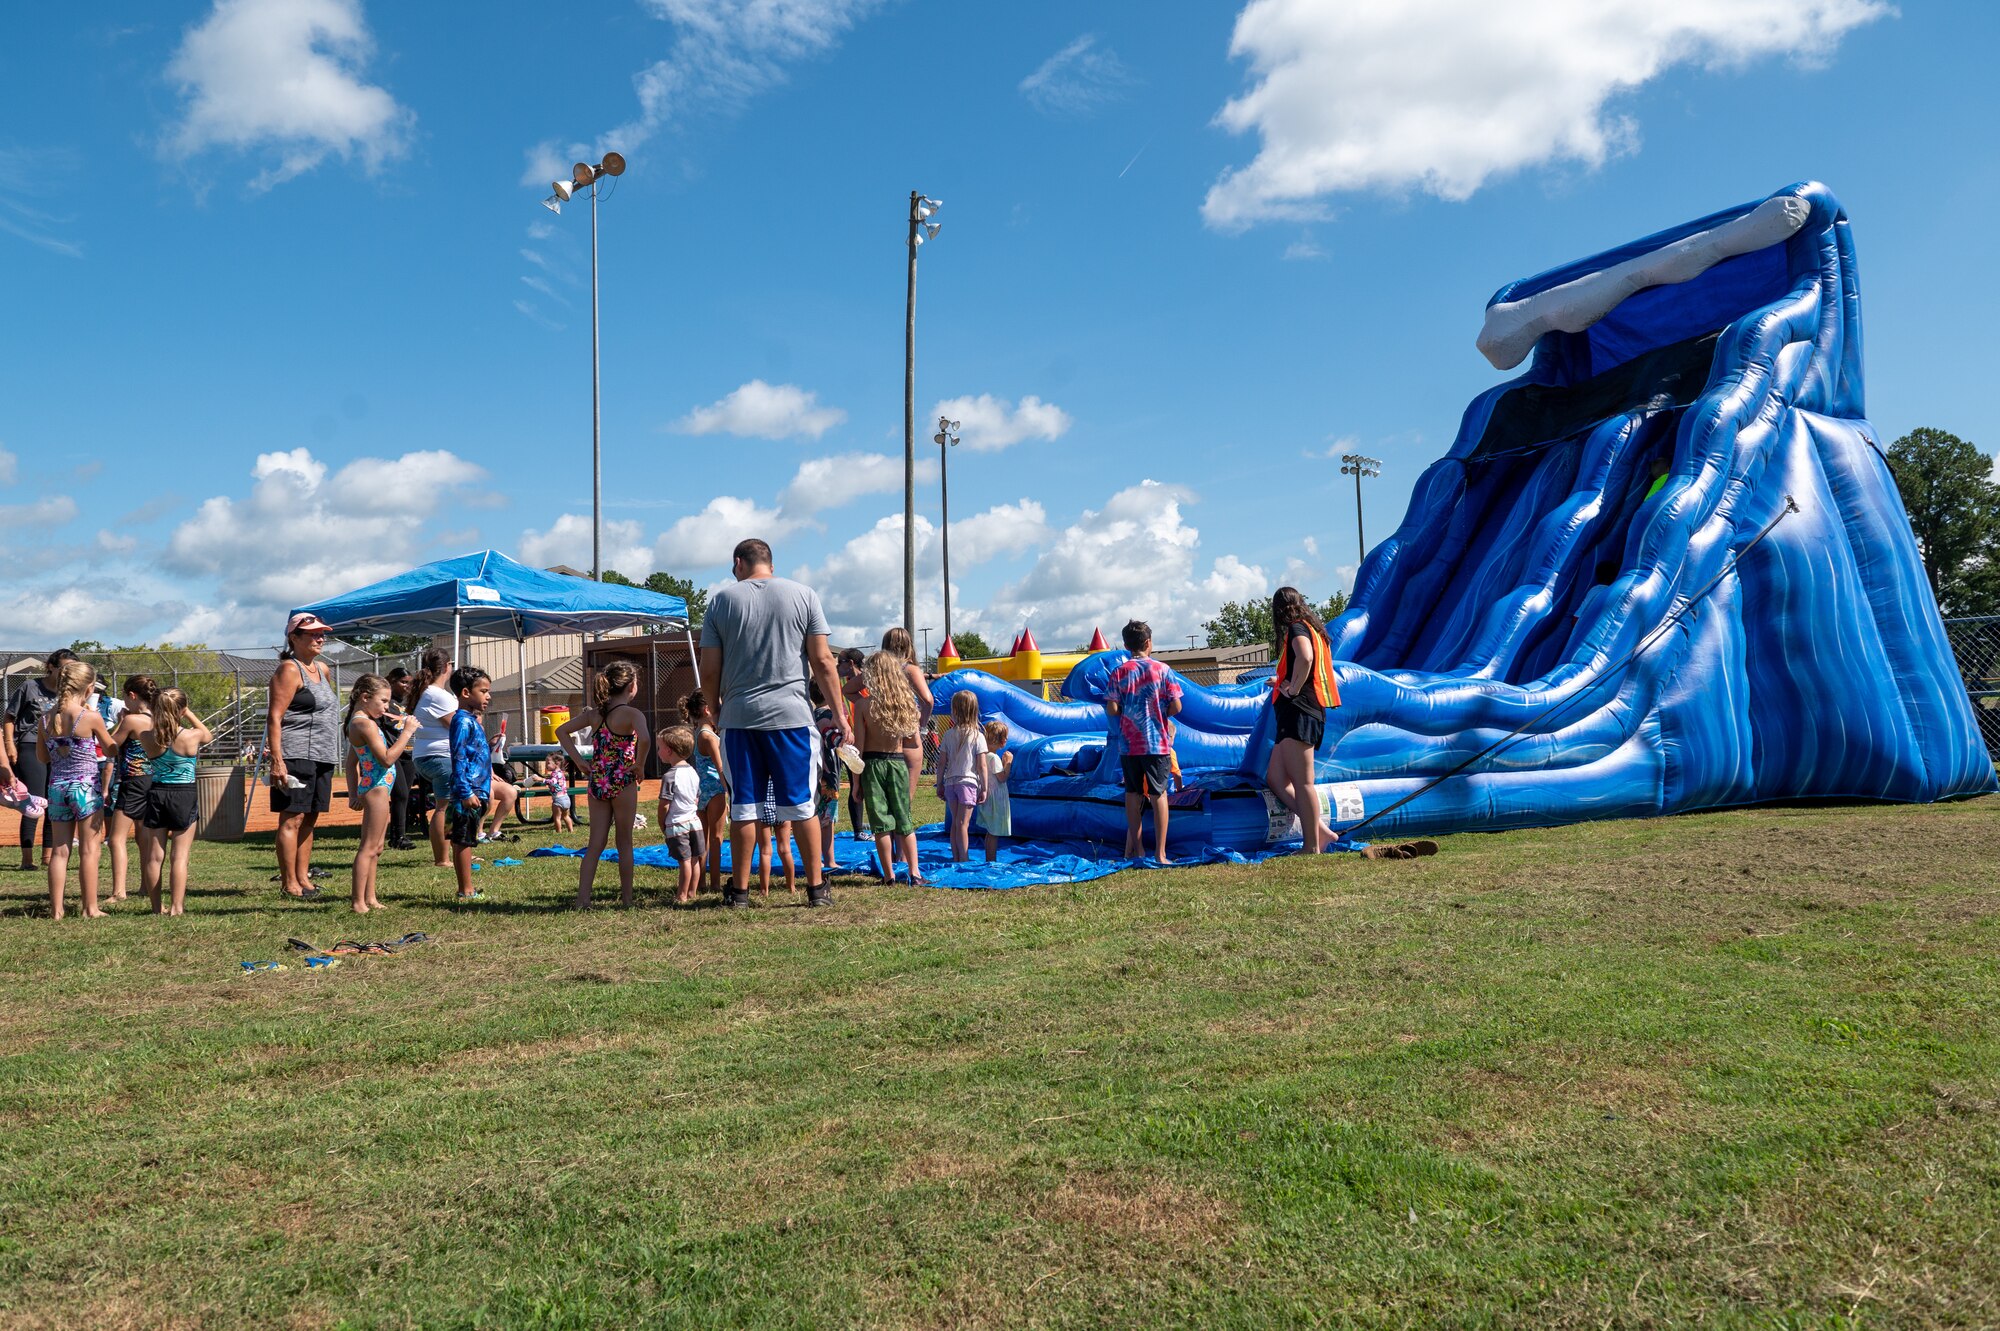 Military families wait in line to go down and inflatable water slide during an outdoor field day.